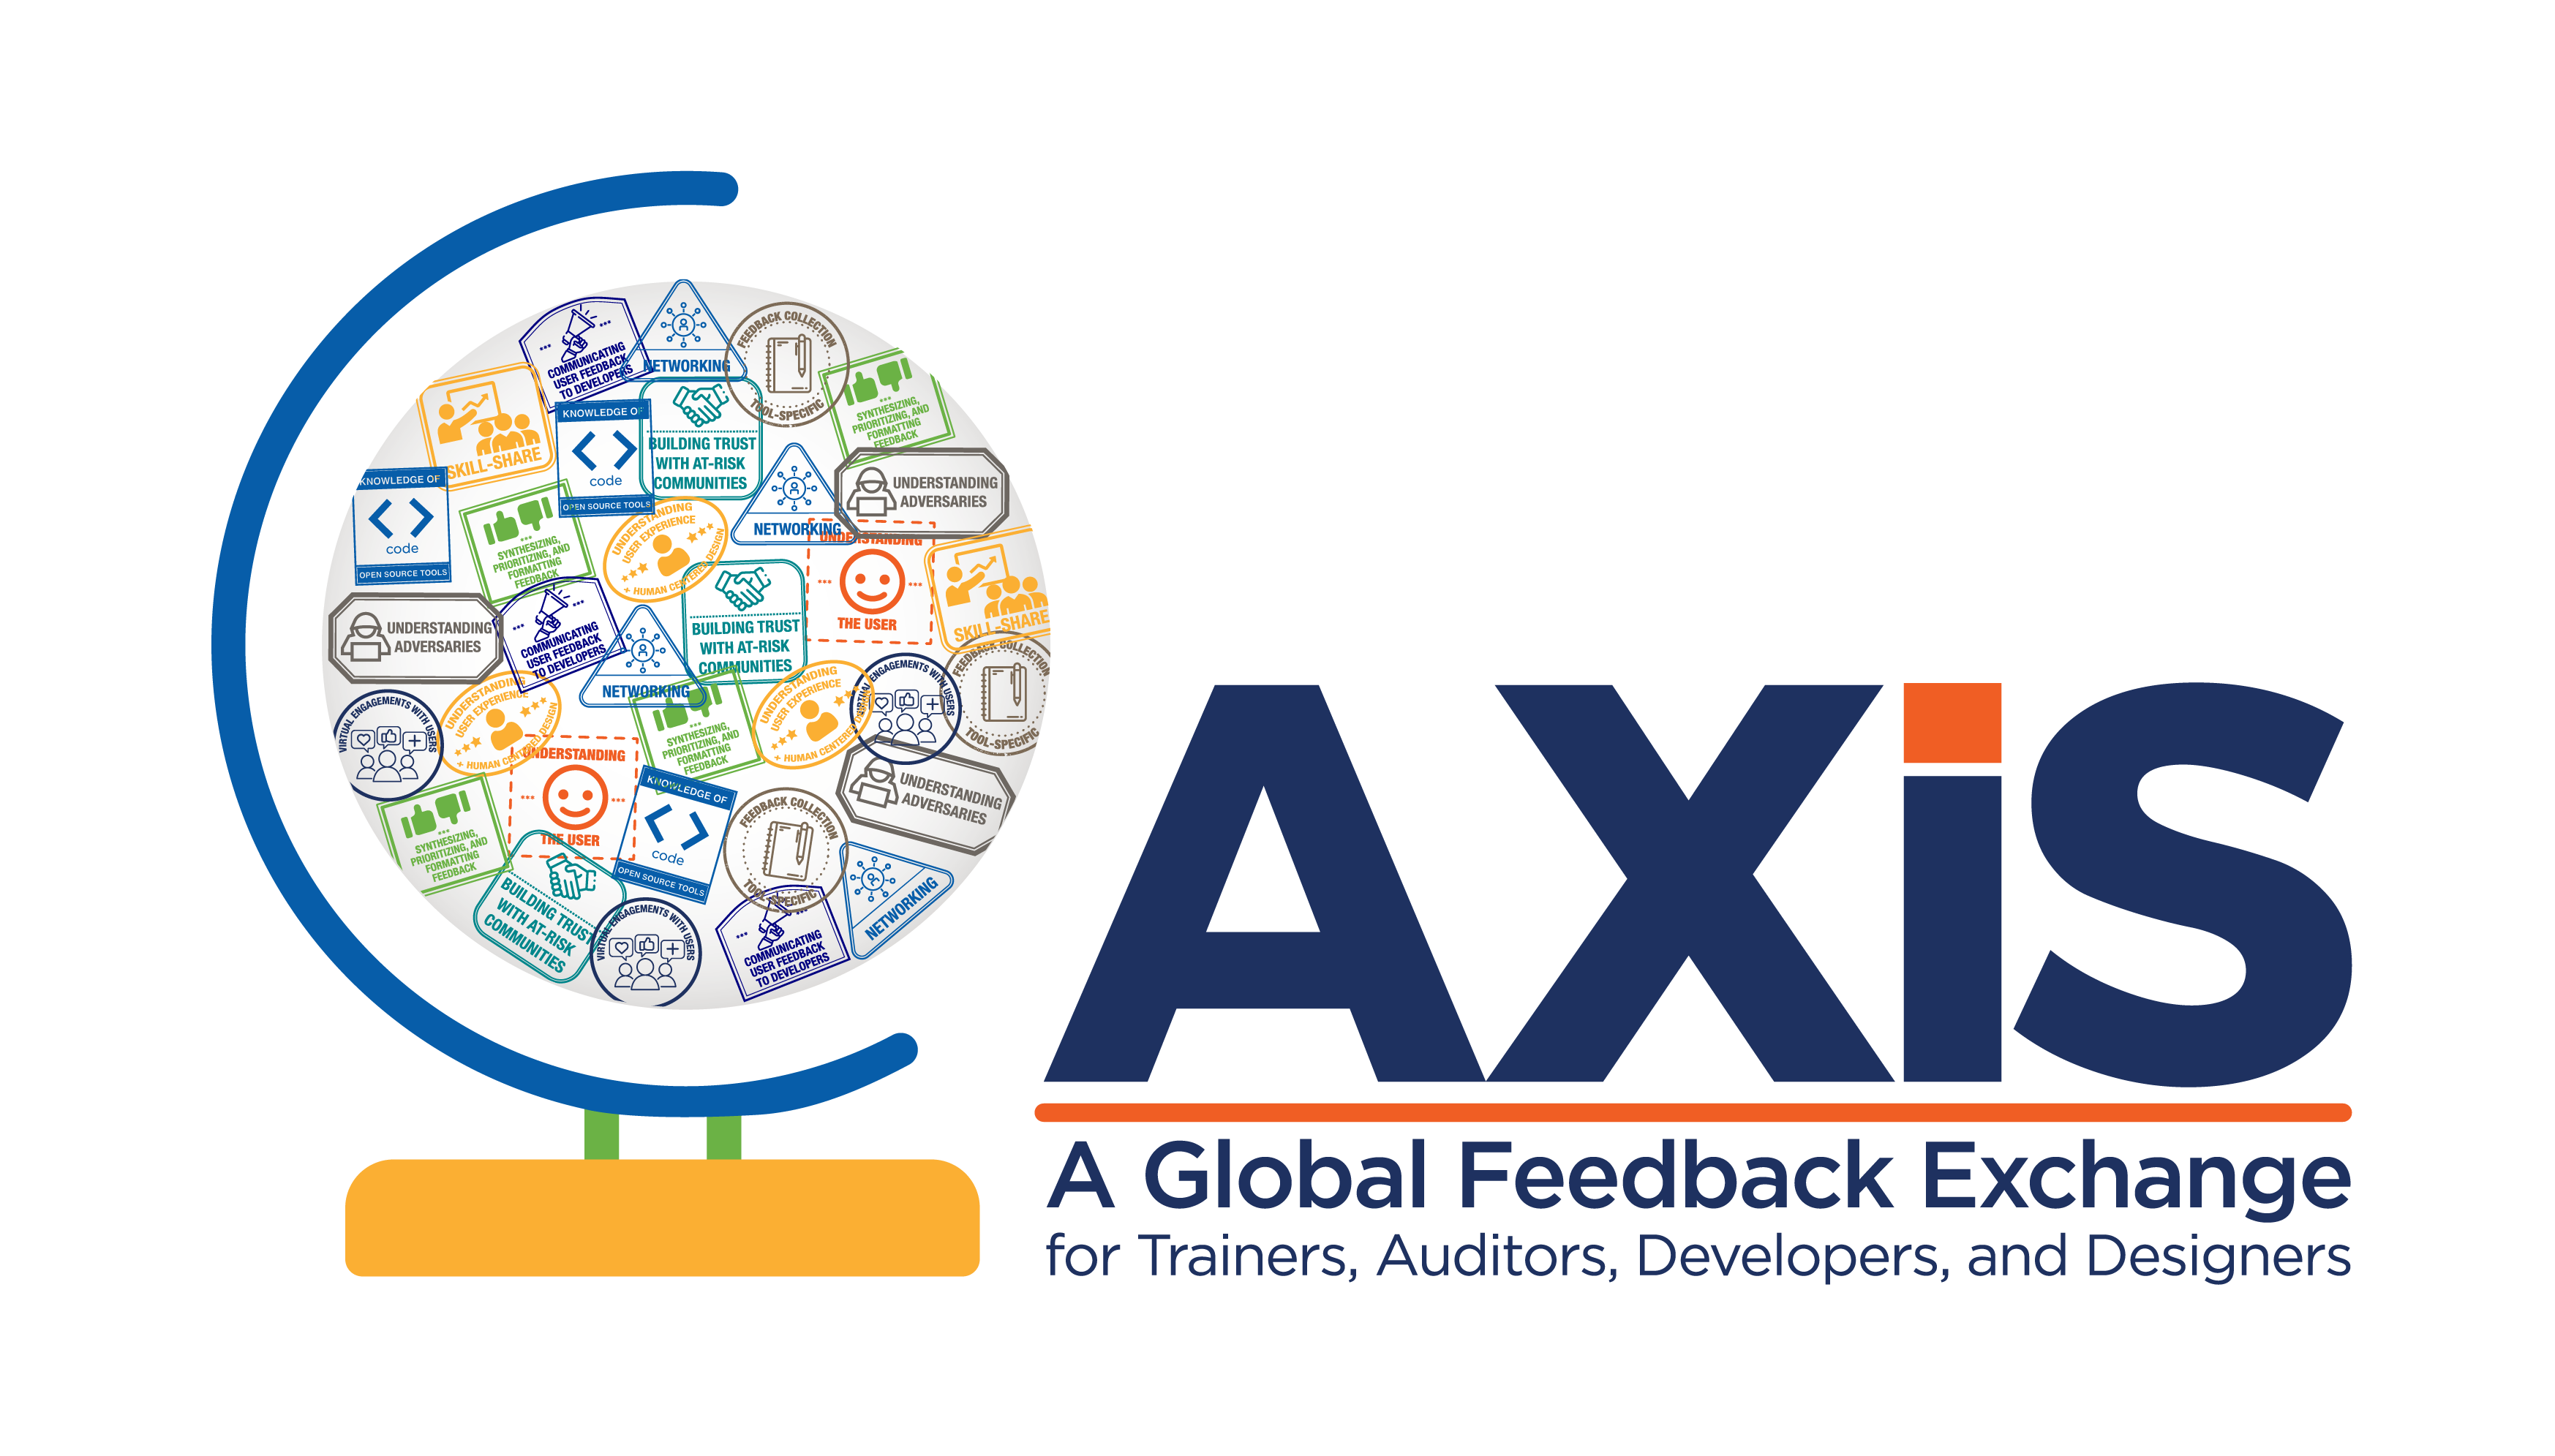 Image of the AXIS event logo